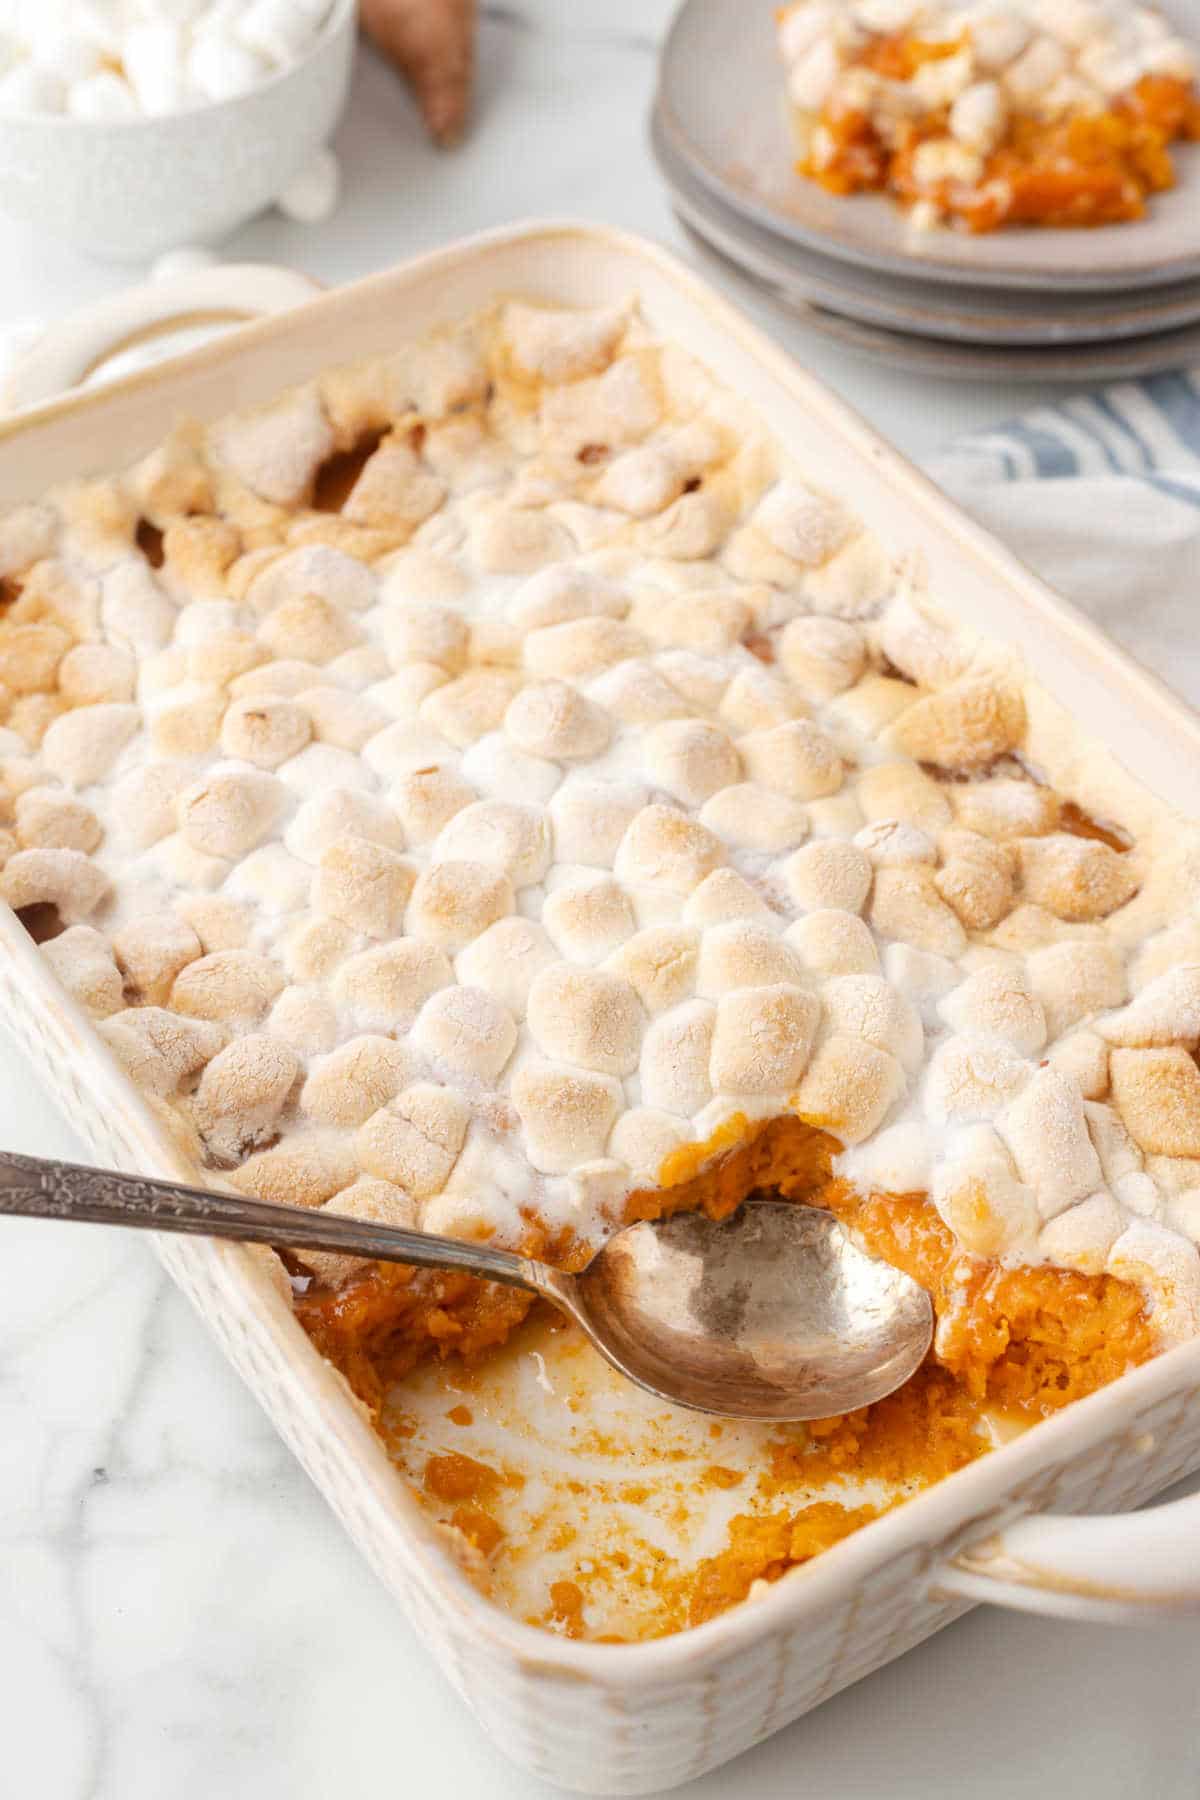 sweet potato recipes for thanksgiving with marshmallow - Arletha Wiese